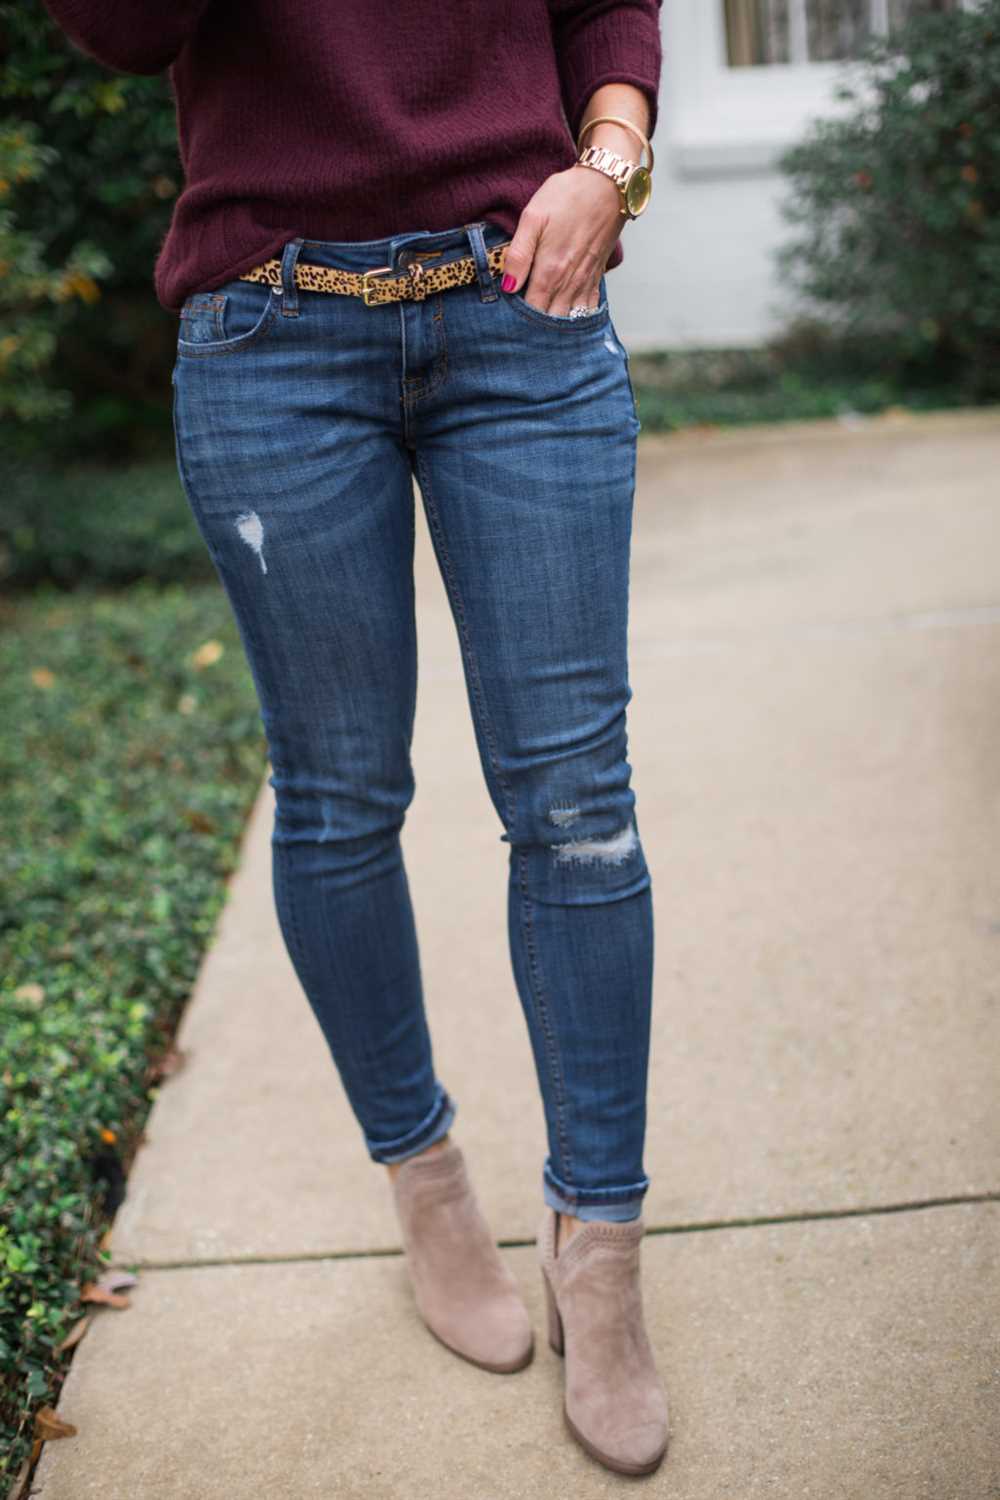 How to wear booties with skinny jeans